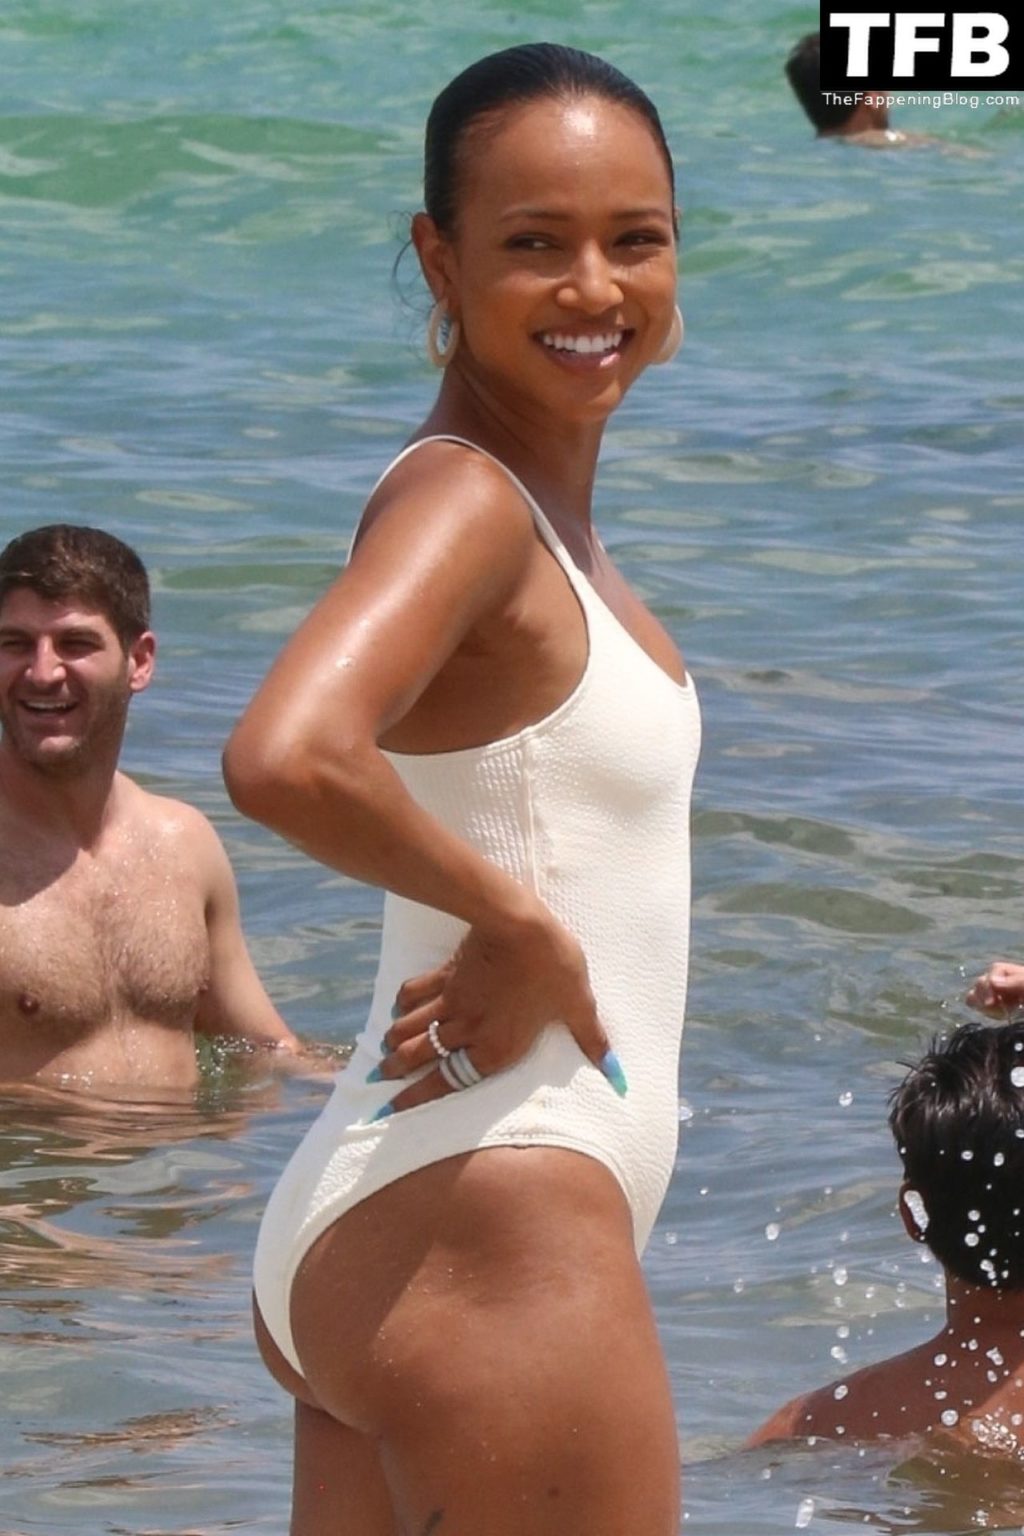 Karrueche Tran Looks Incredible in a White Swimsuit on the Beach in Miami (45 Photos)